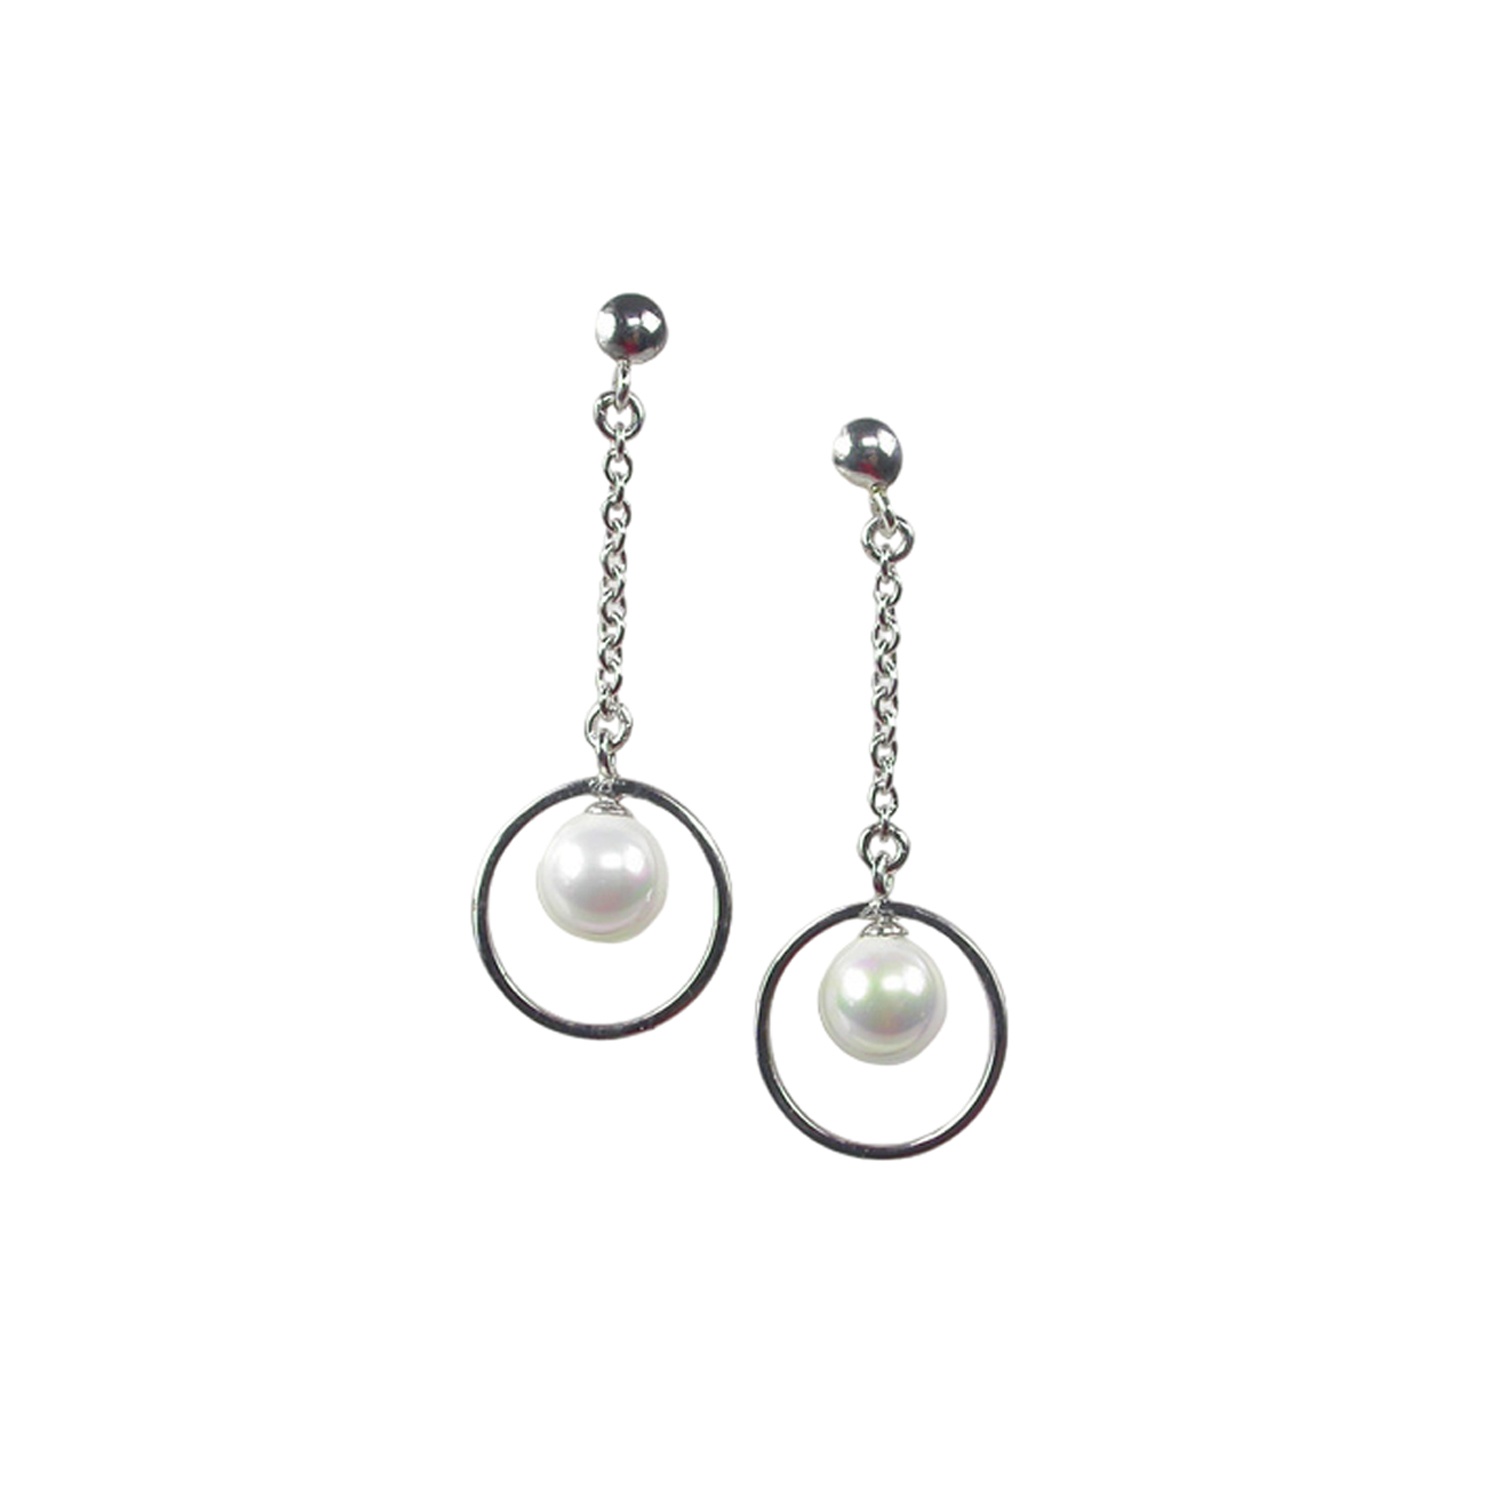 Silver Earrings with 7 mm. White Pearls